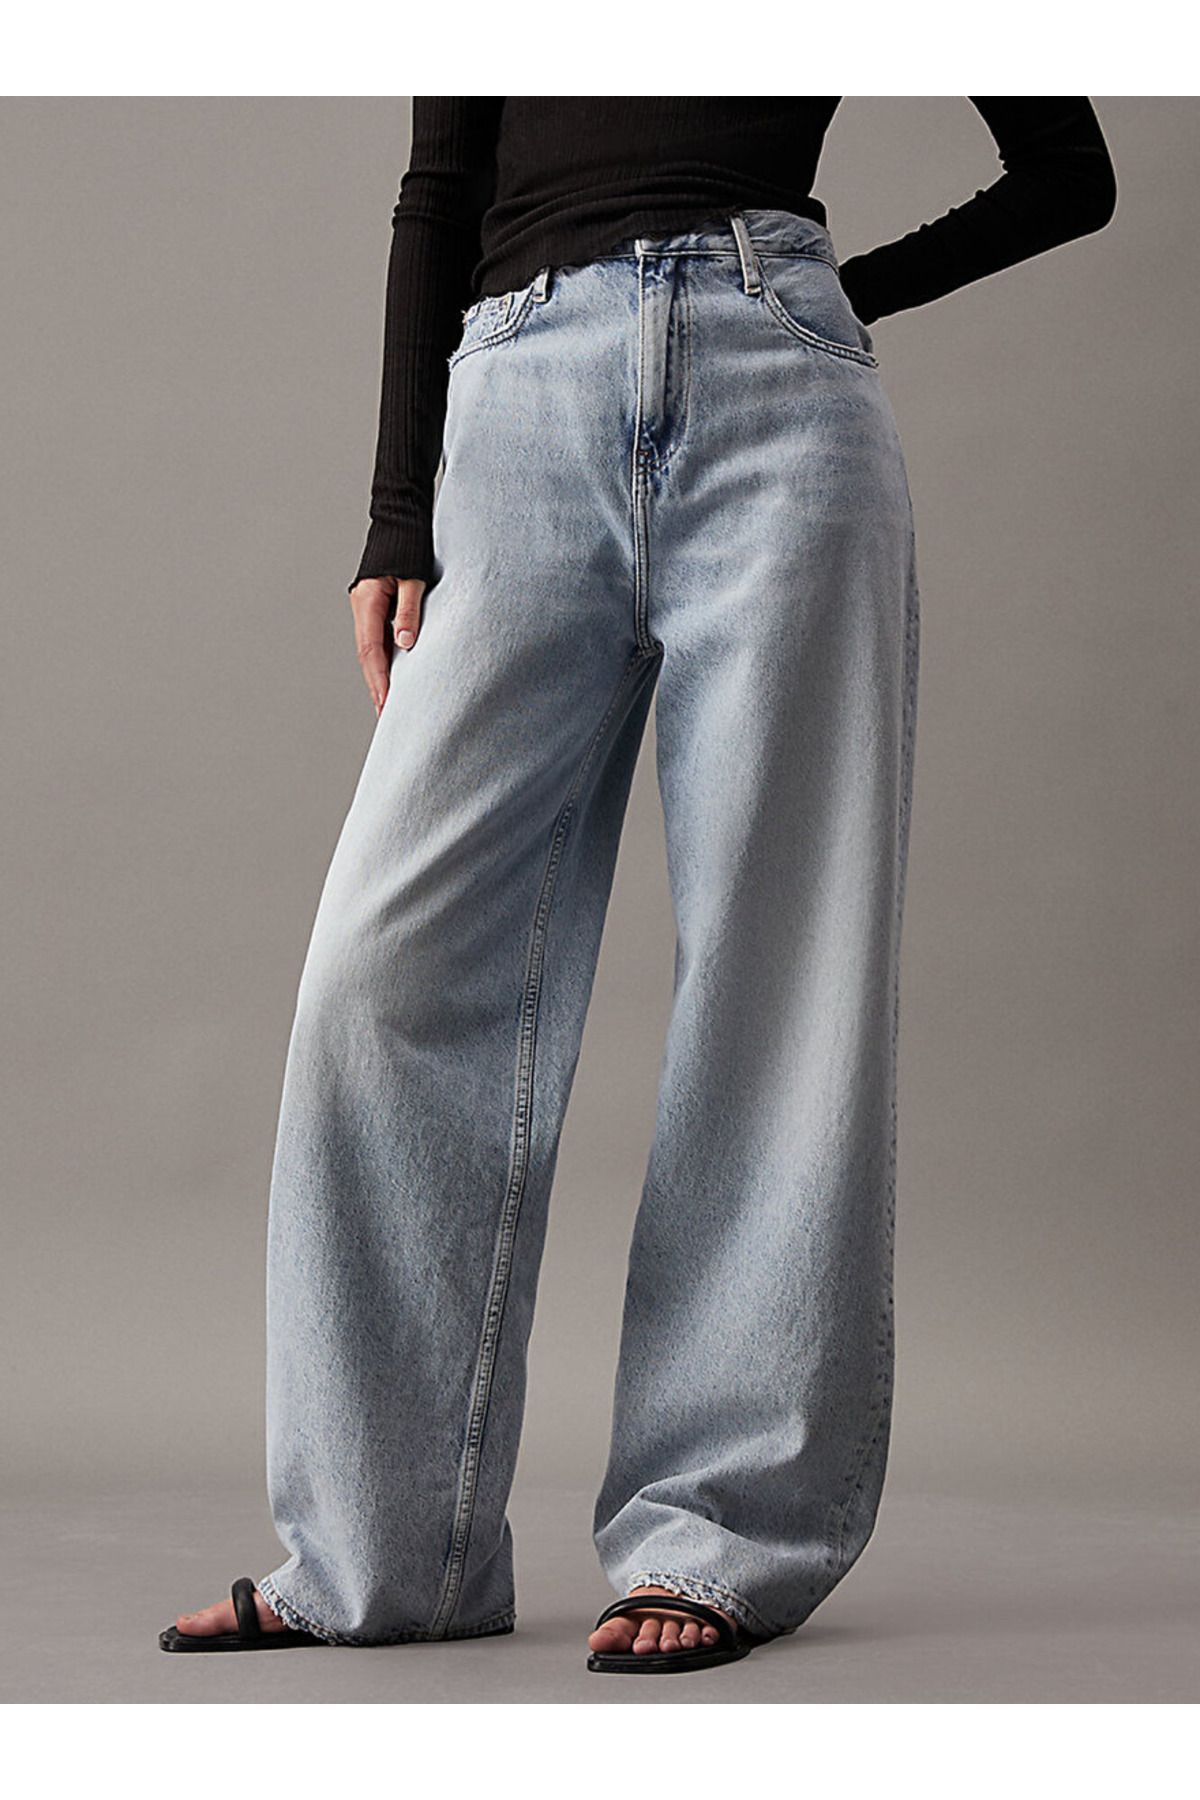 Calvin Klein High Rise Relaxed Jeans